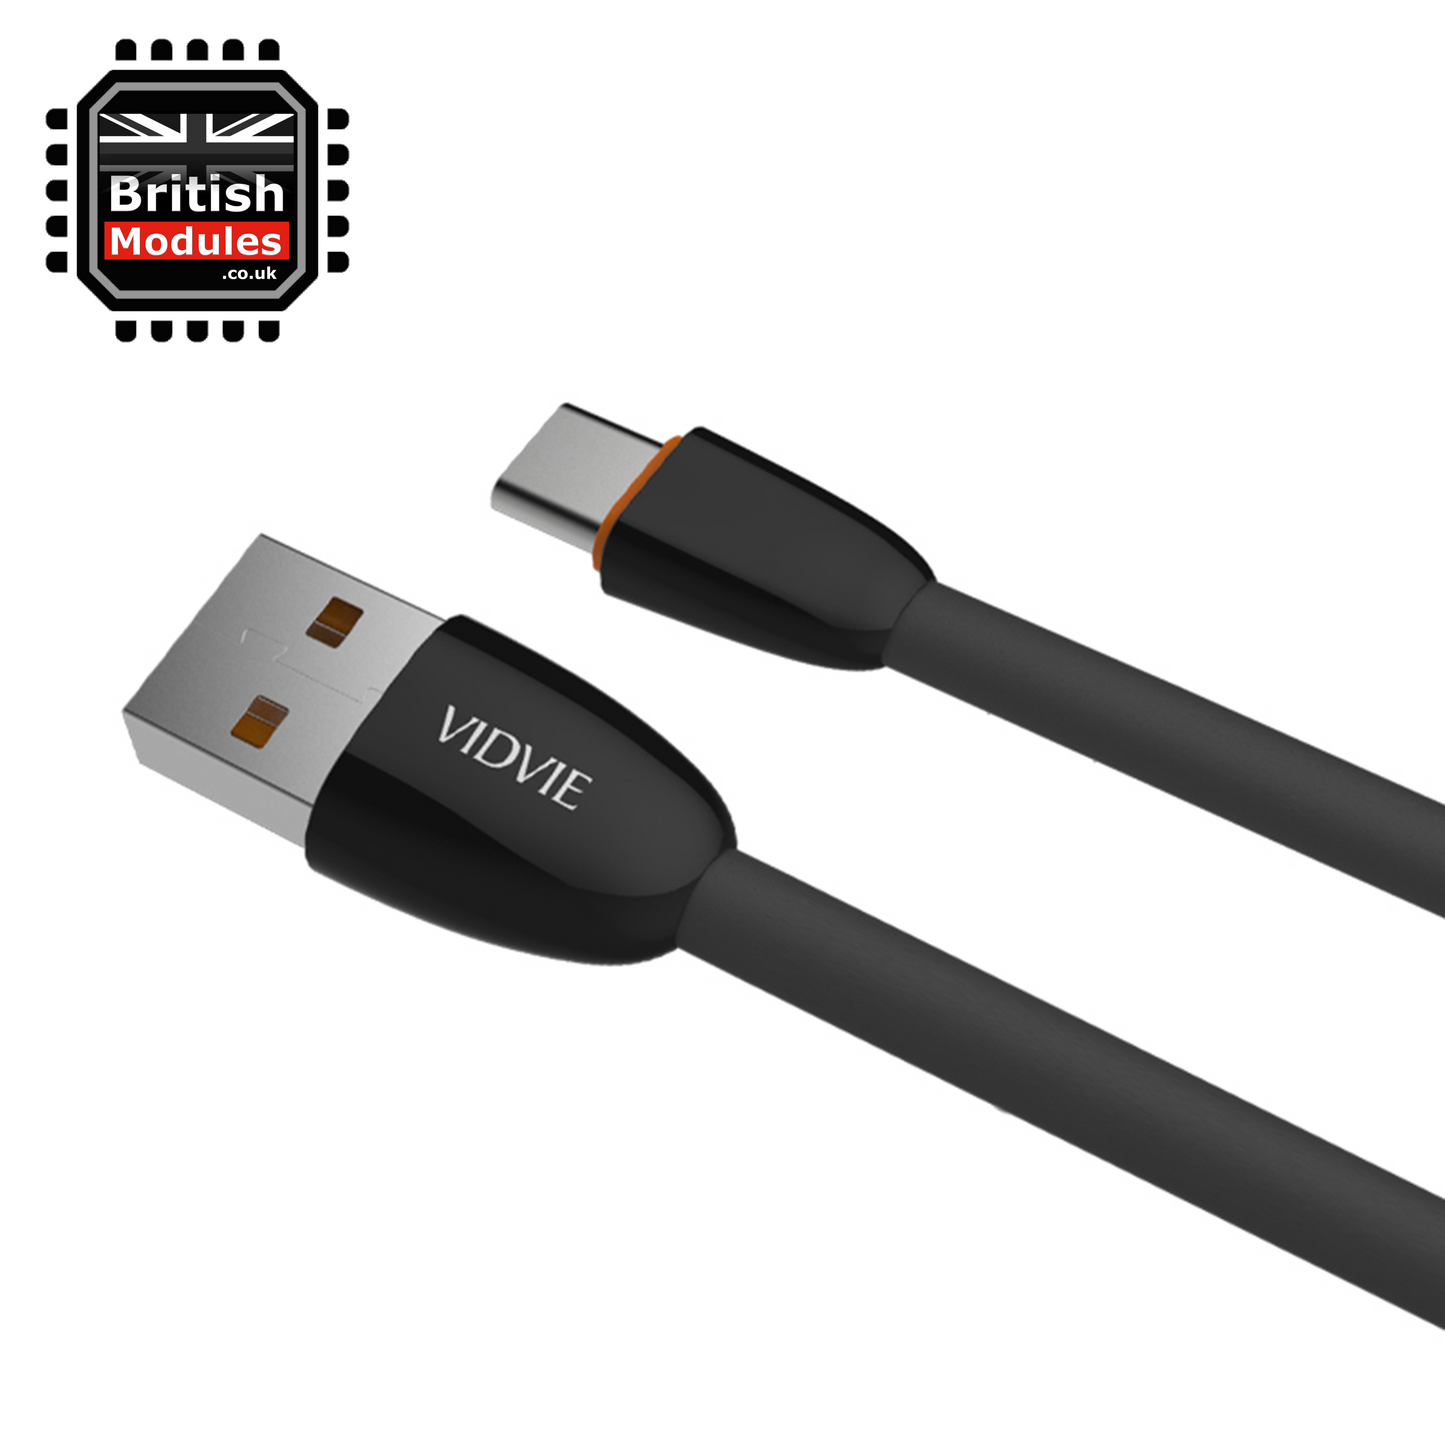 VidVie USB-A to USB-C Type C Charging Cable for Fast Charging Android Tablets / Mobile Phones Samsung Huawei OnePlus Google Oppo Honor Sony LG Nokia